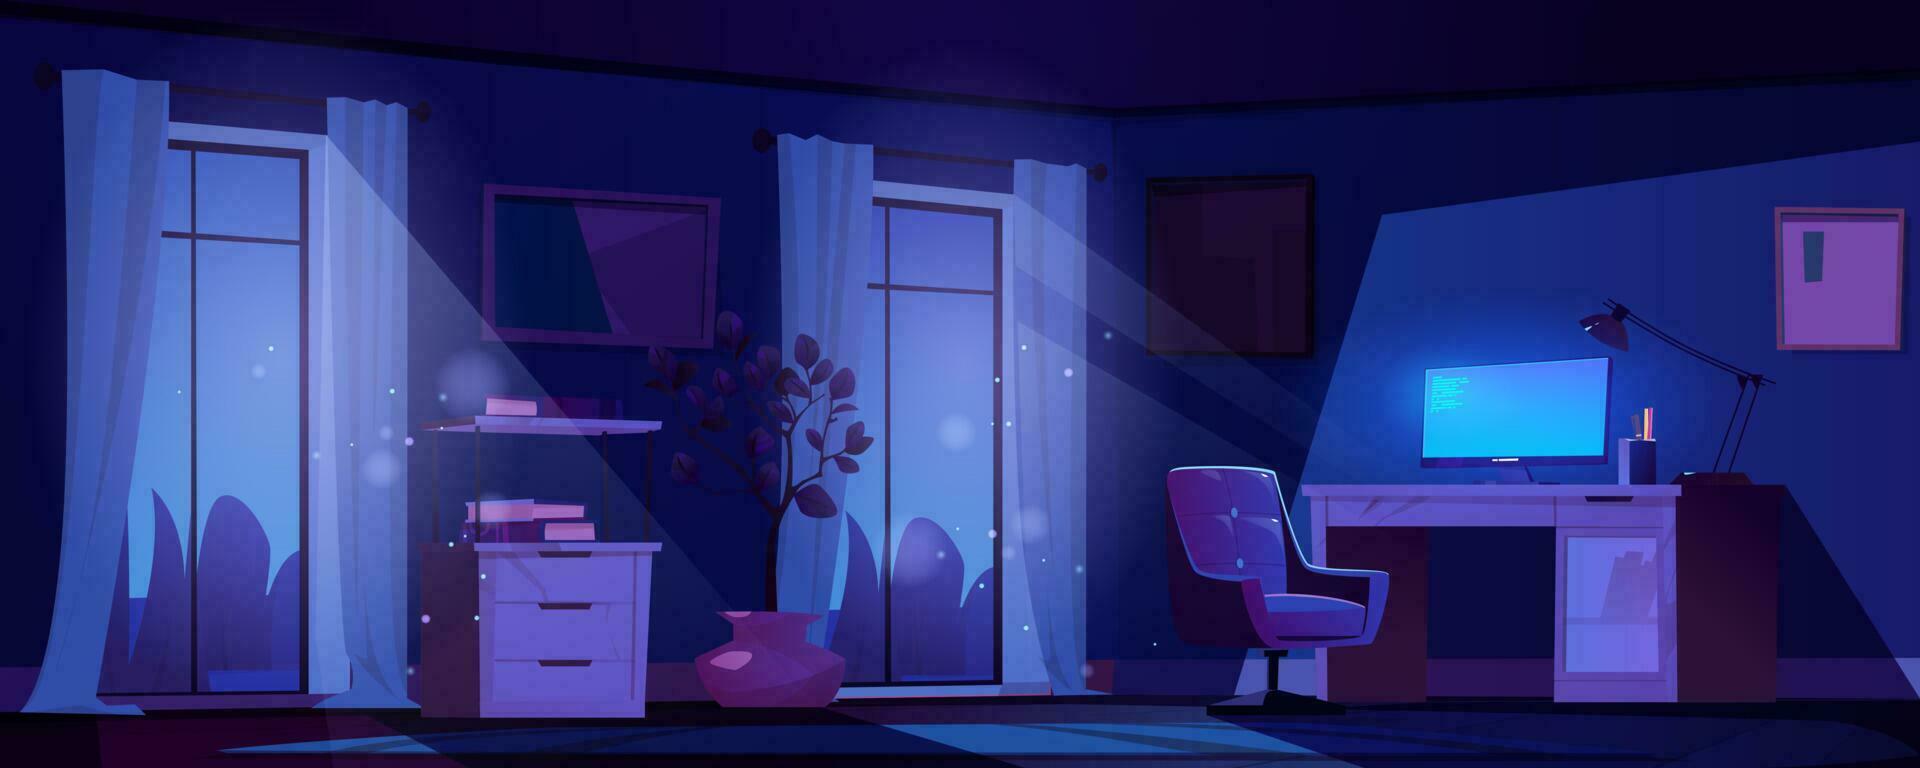 Night work office room with magic light background vector